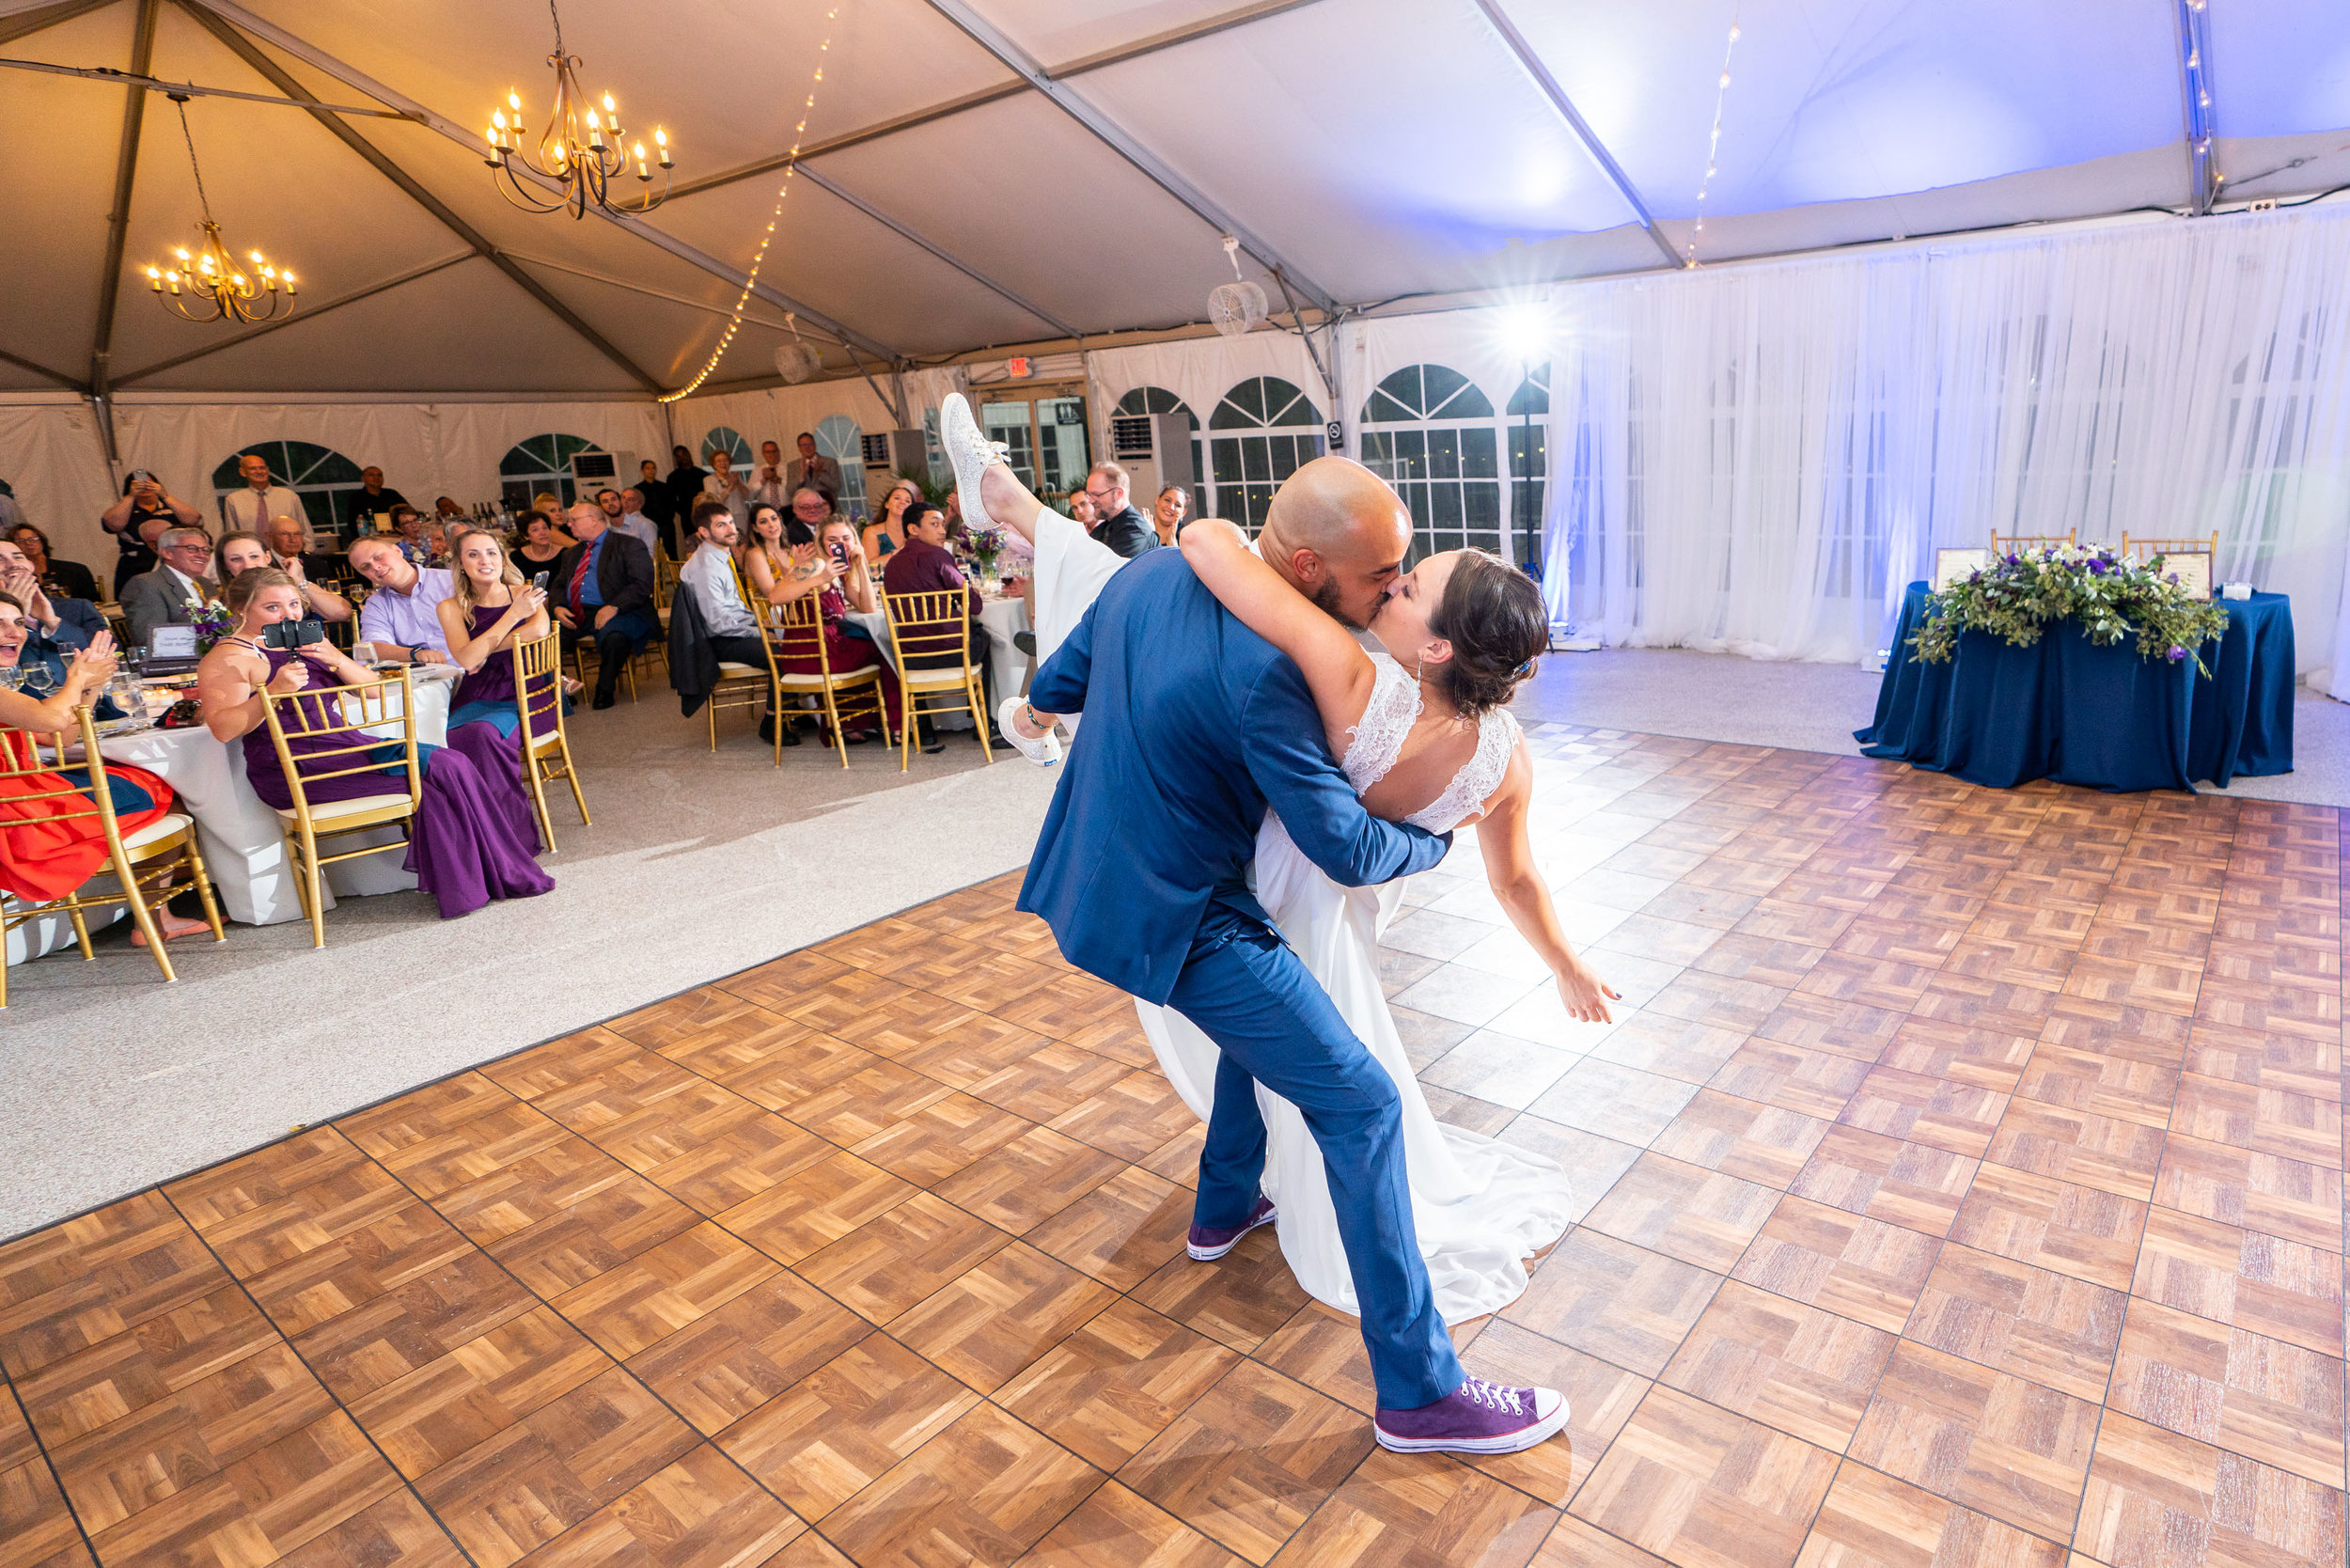 Amazing dip and first dance photo at Rust Manor House wedding reception tent HVL-F60RM